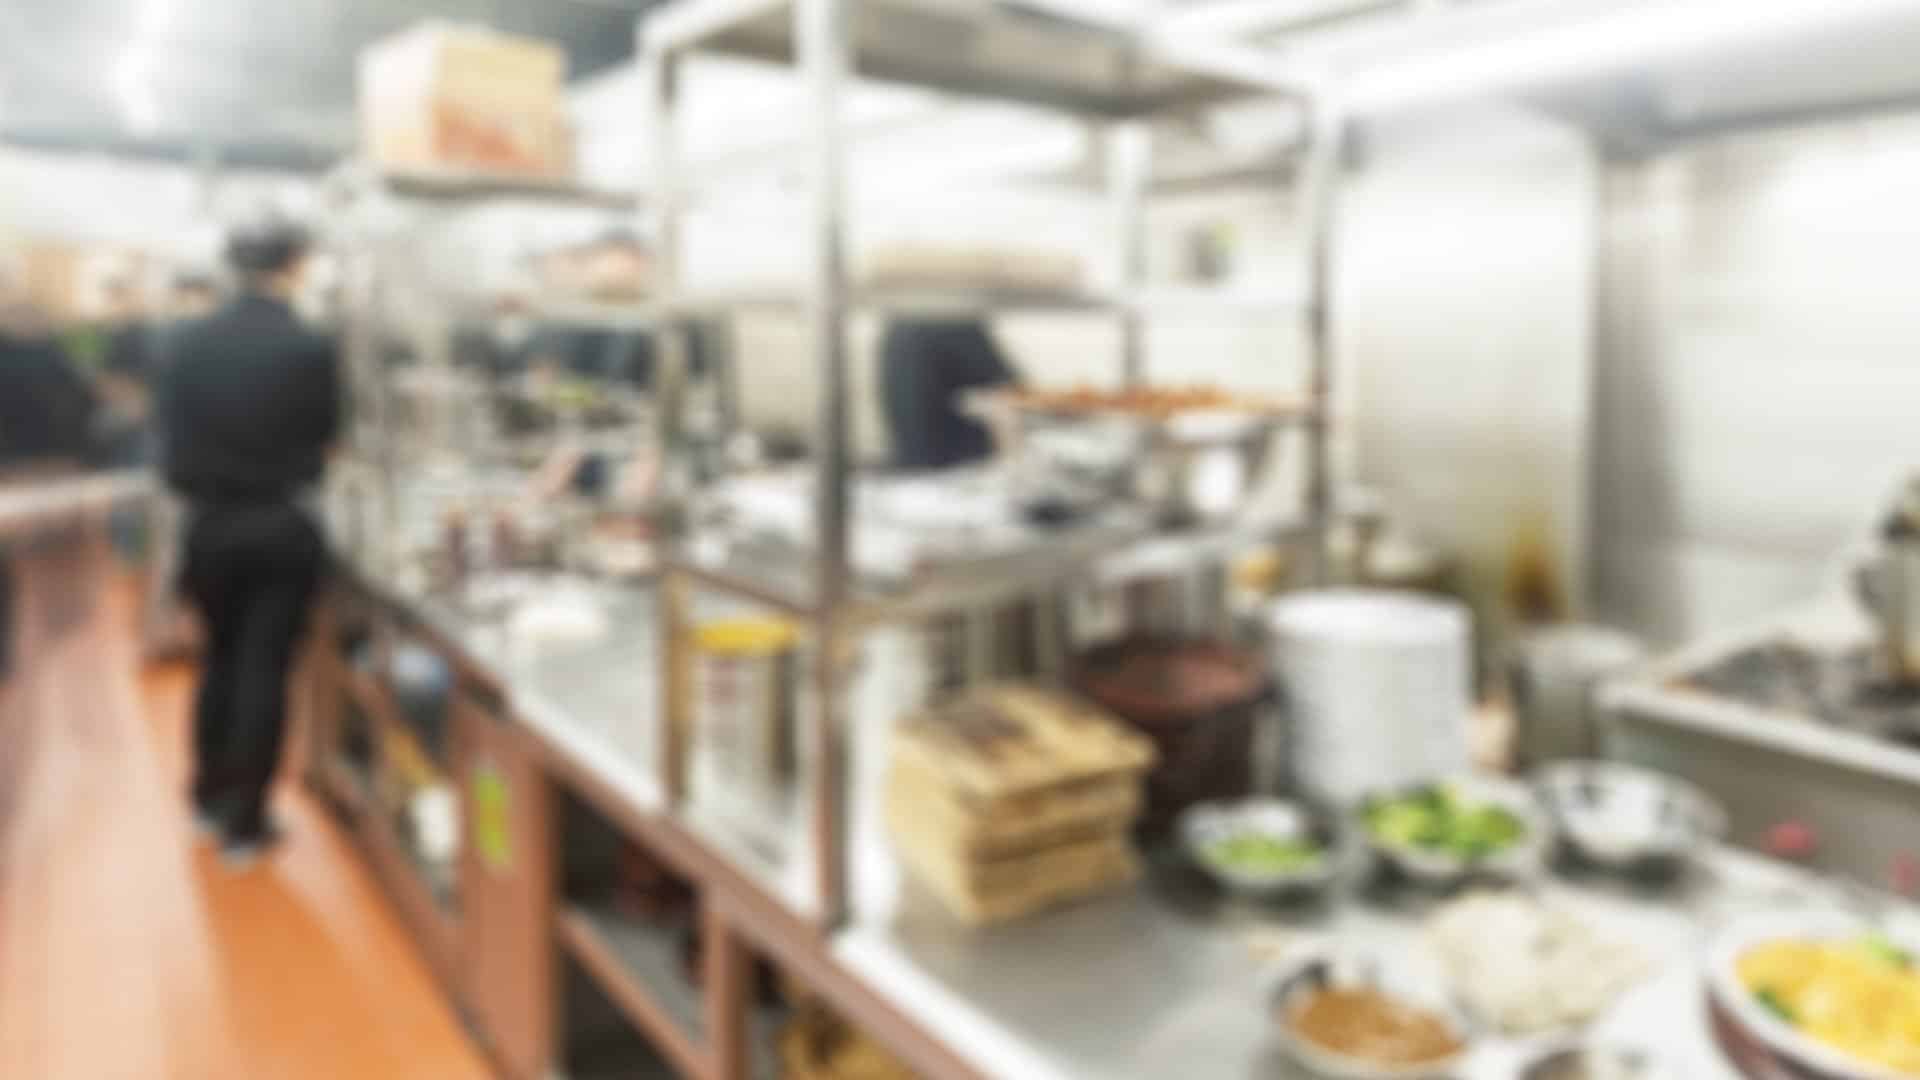 Announcing: Our Community Kitchen Project